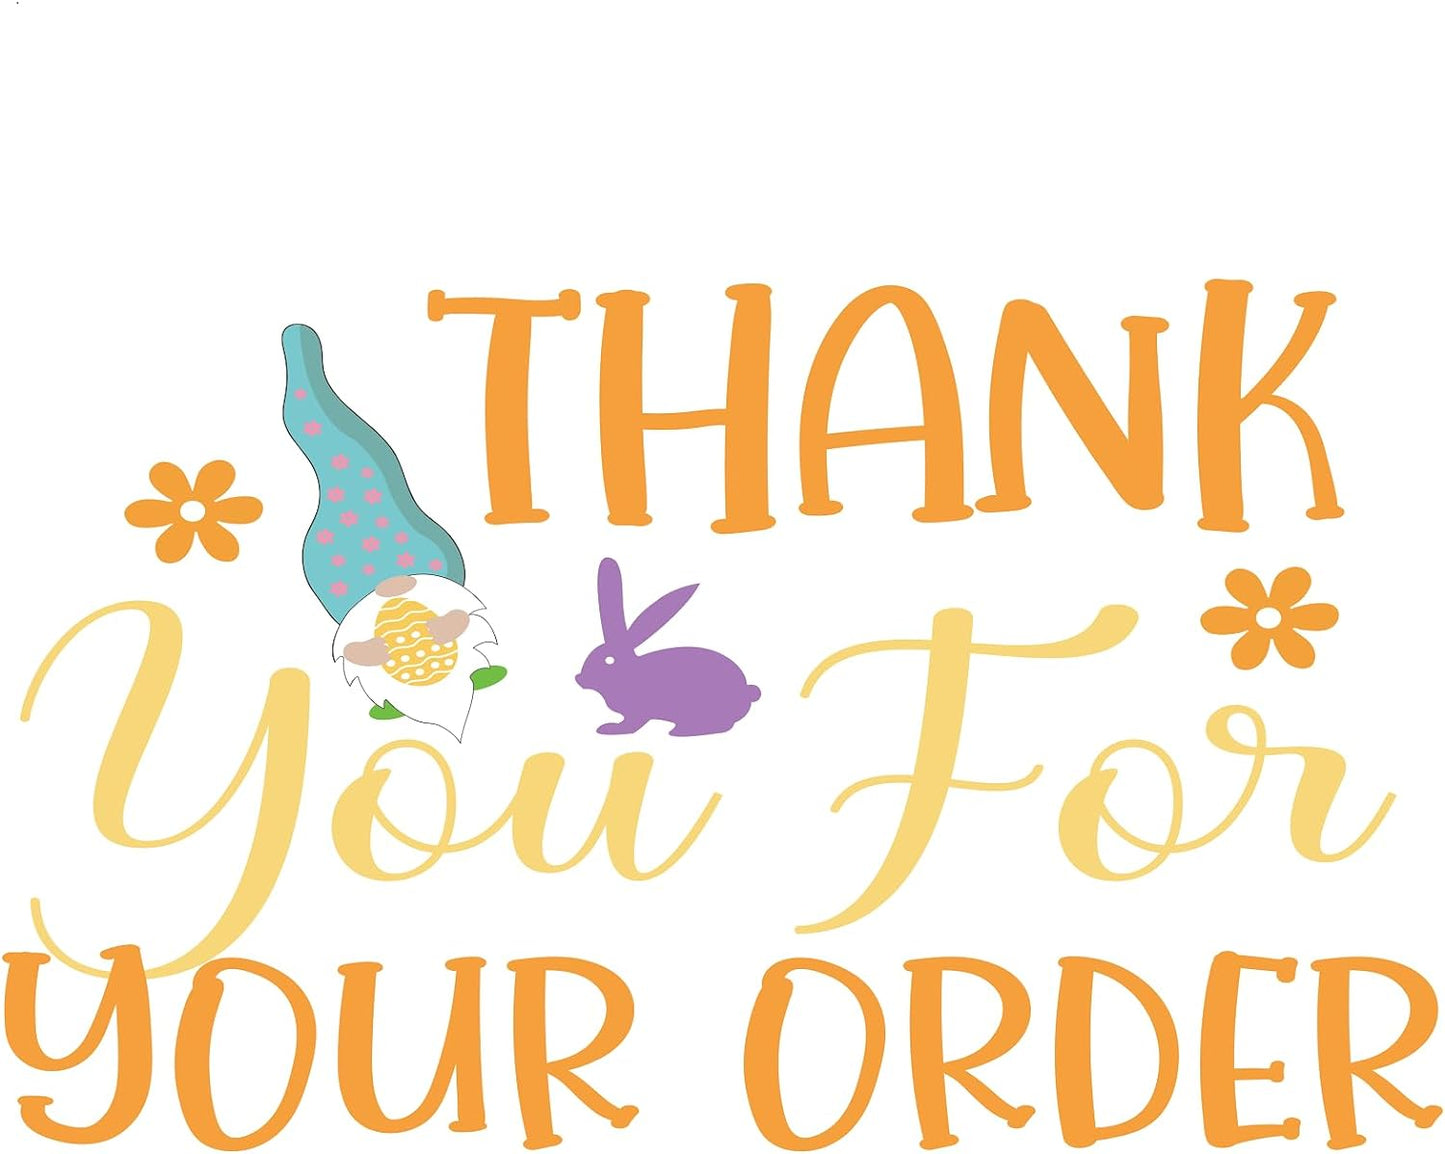 Inspirational Quote "Thank You for Your Order" Motivational Sticker Vinyl Decal Motivation Stickers- 5" Vinyl Sticker Waterproof